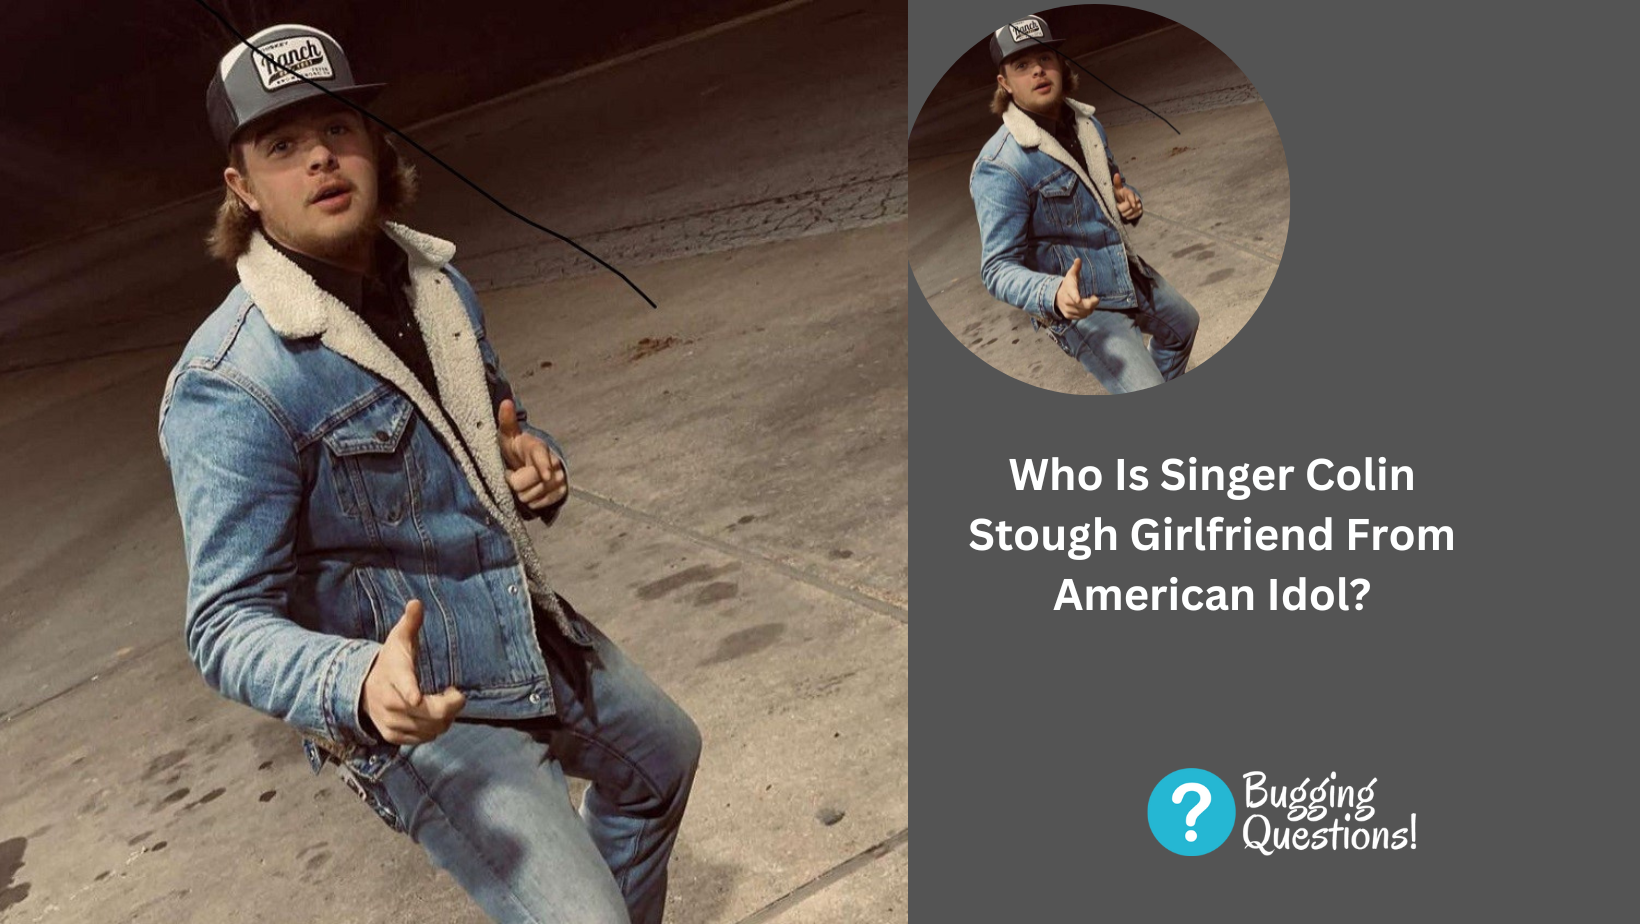 Who Is Singer Colin Stough Girlfriend From American Idol?